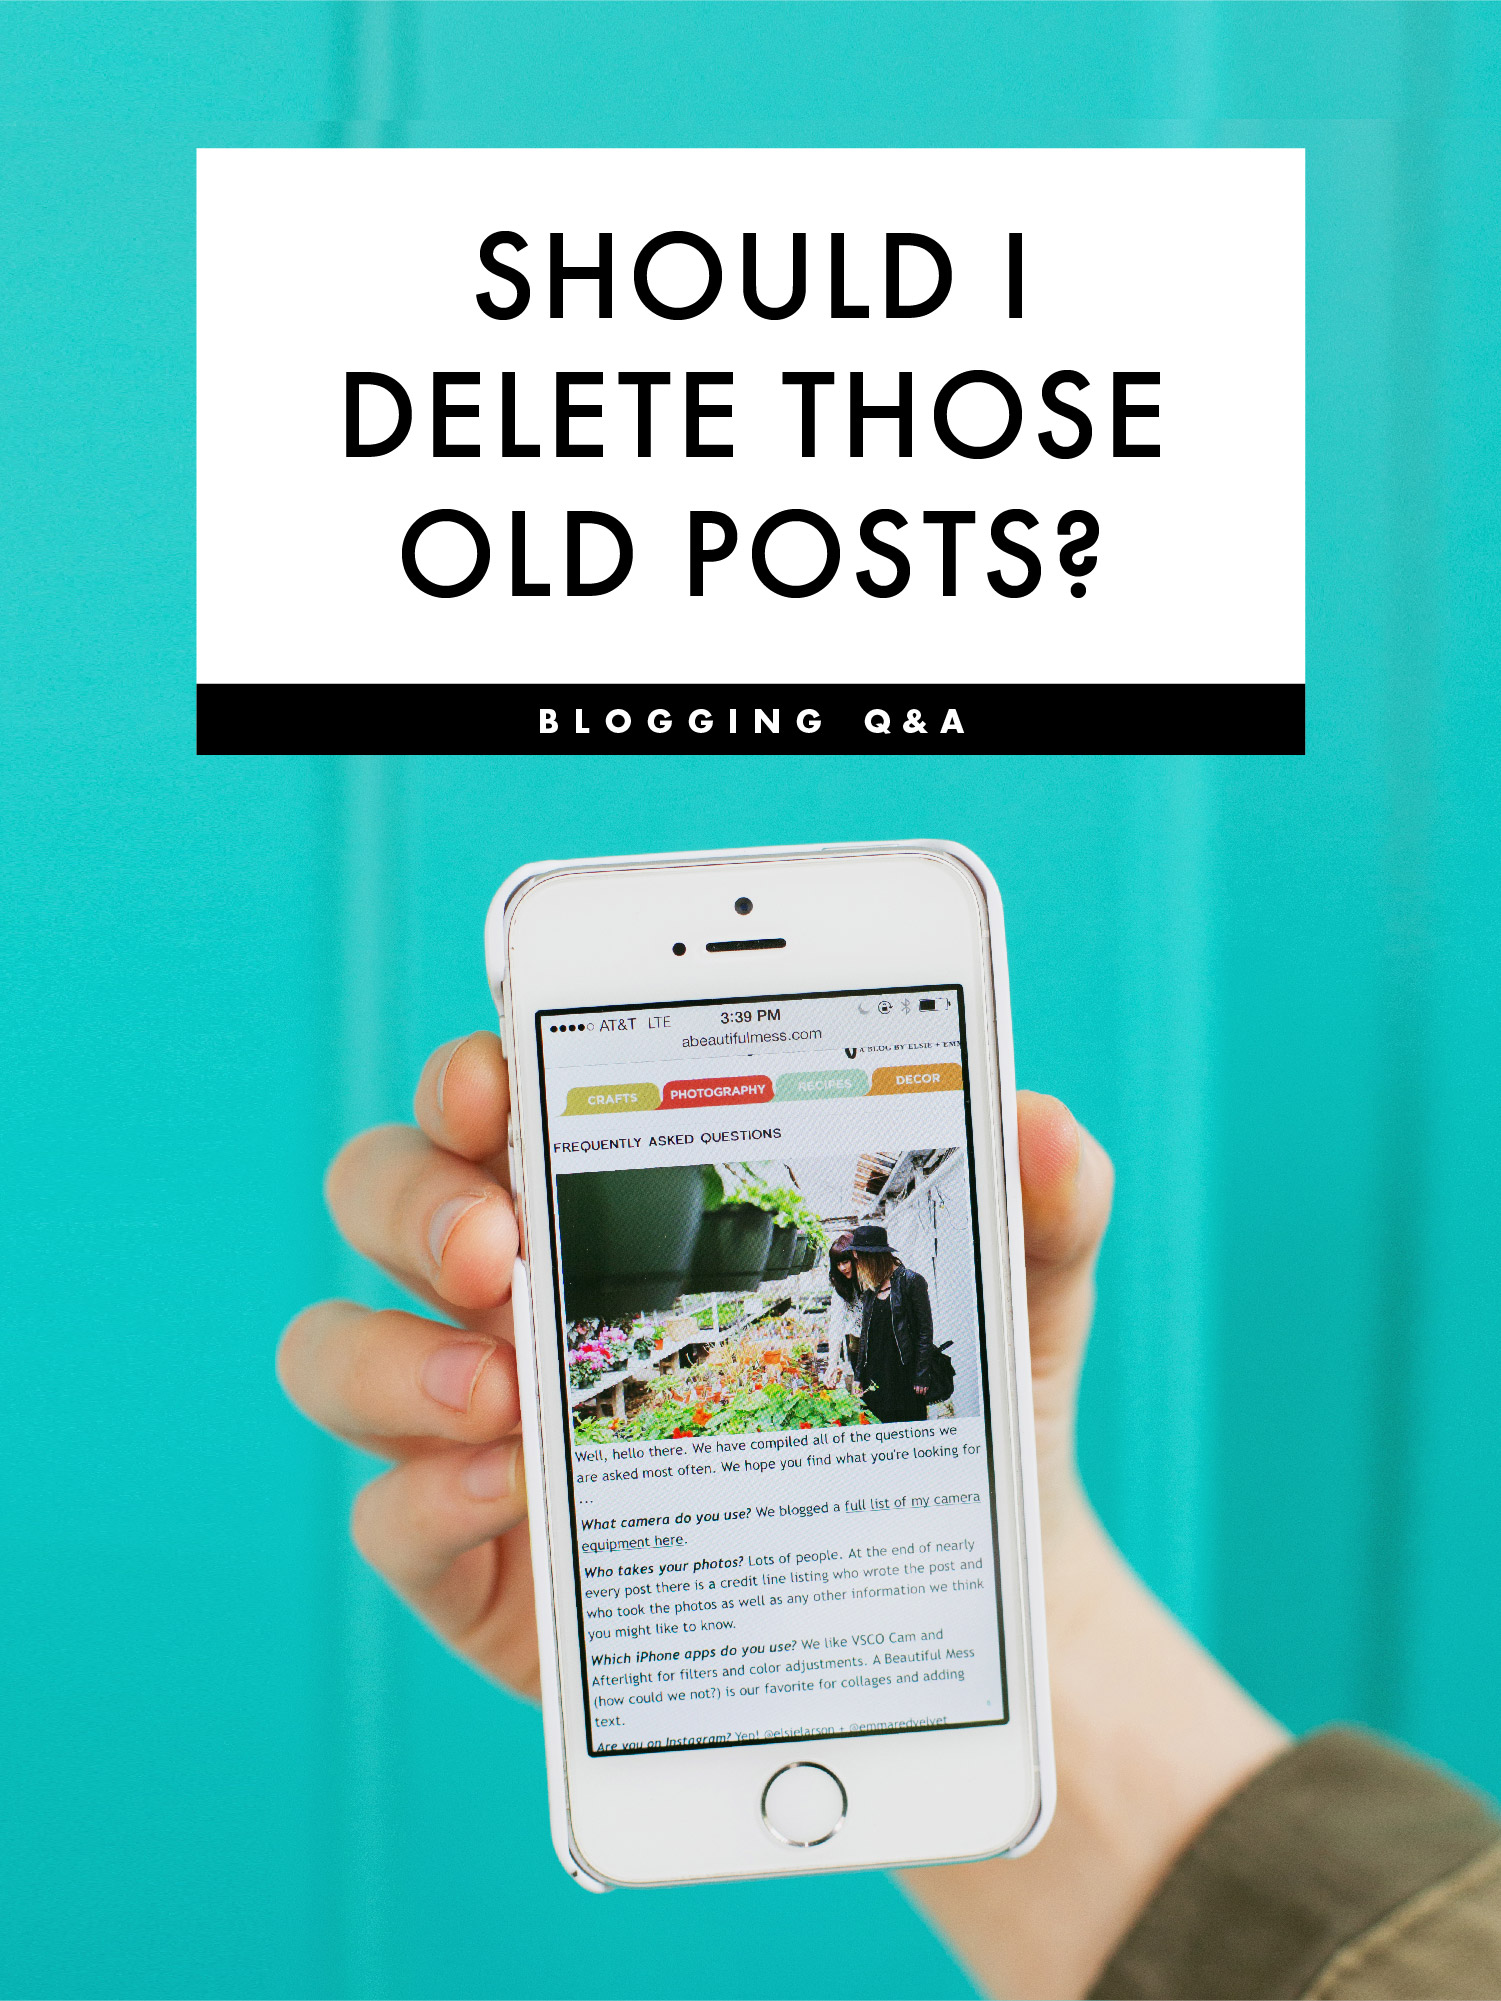 Will deleting old posts help or hurt my blog?